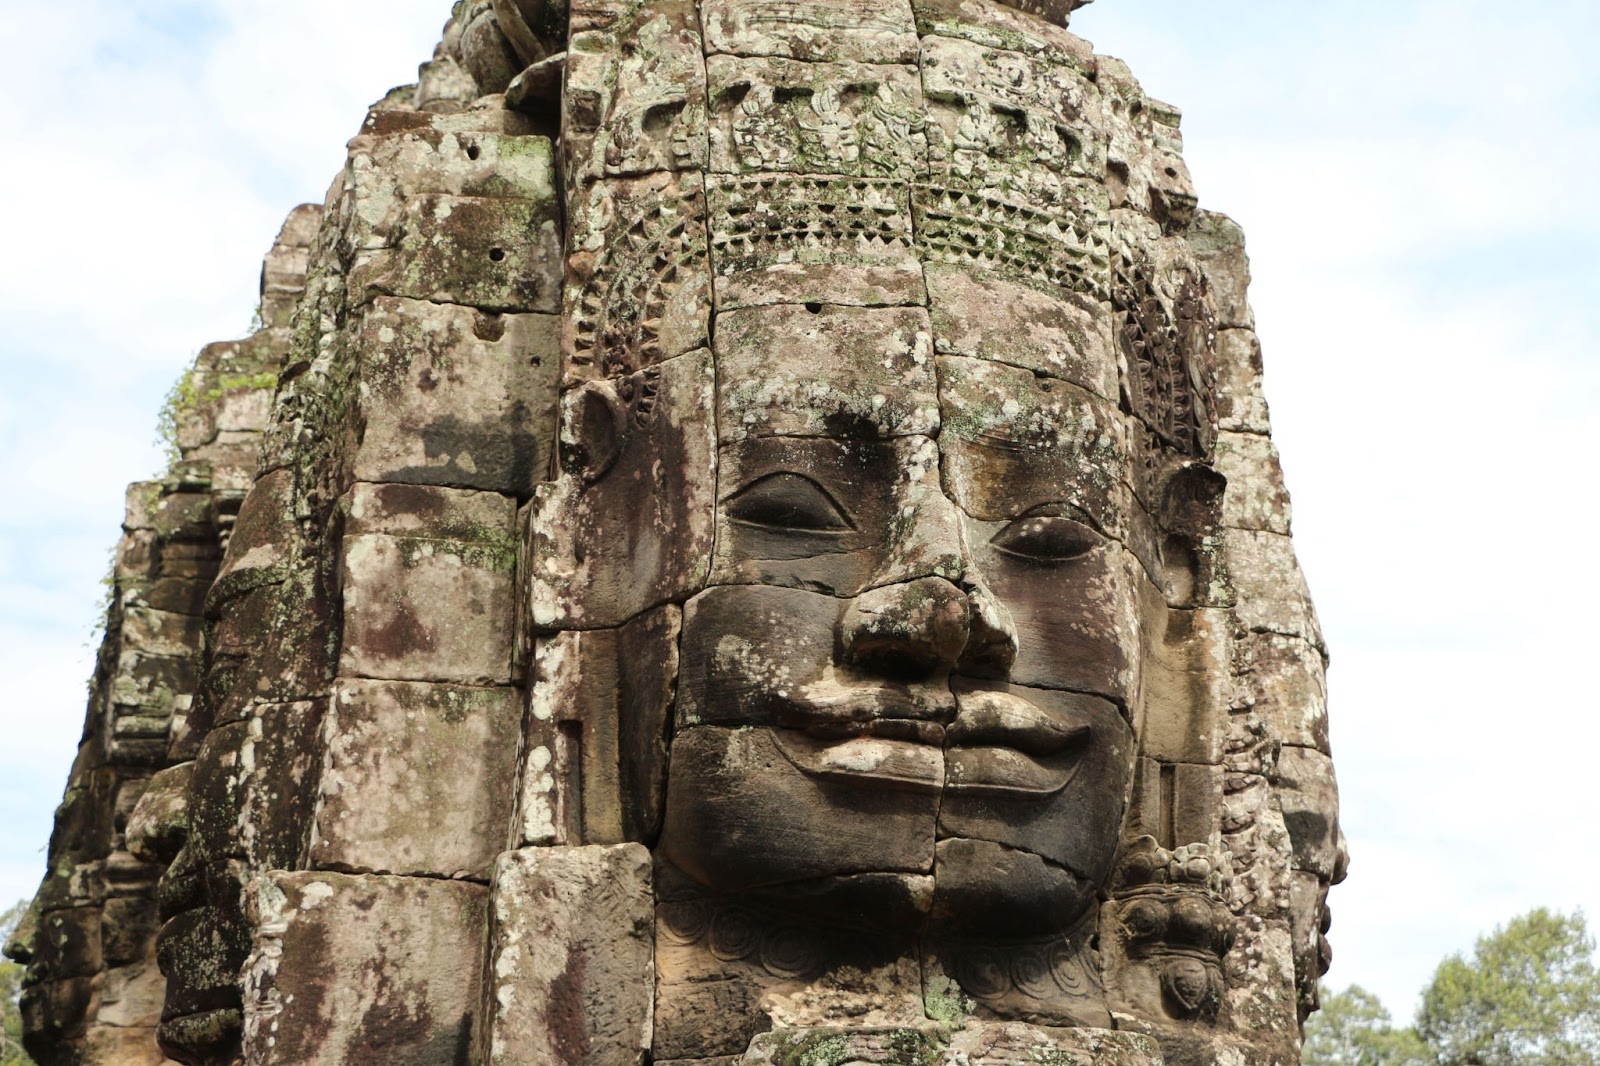 3 days in Siem Reap. This a close-up of one of the many beautiful faces that adorn the Bayon temple.